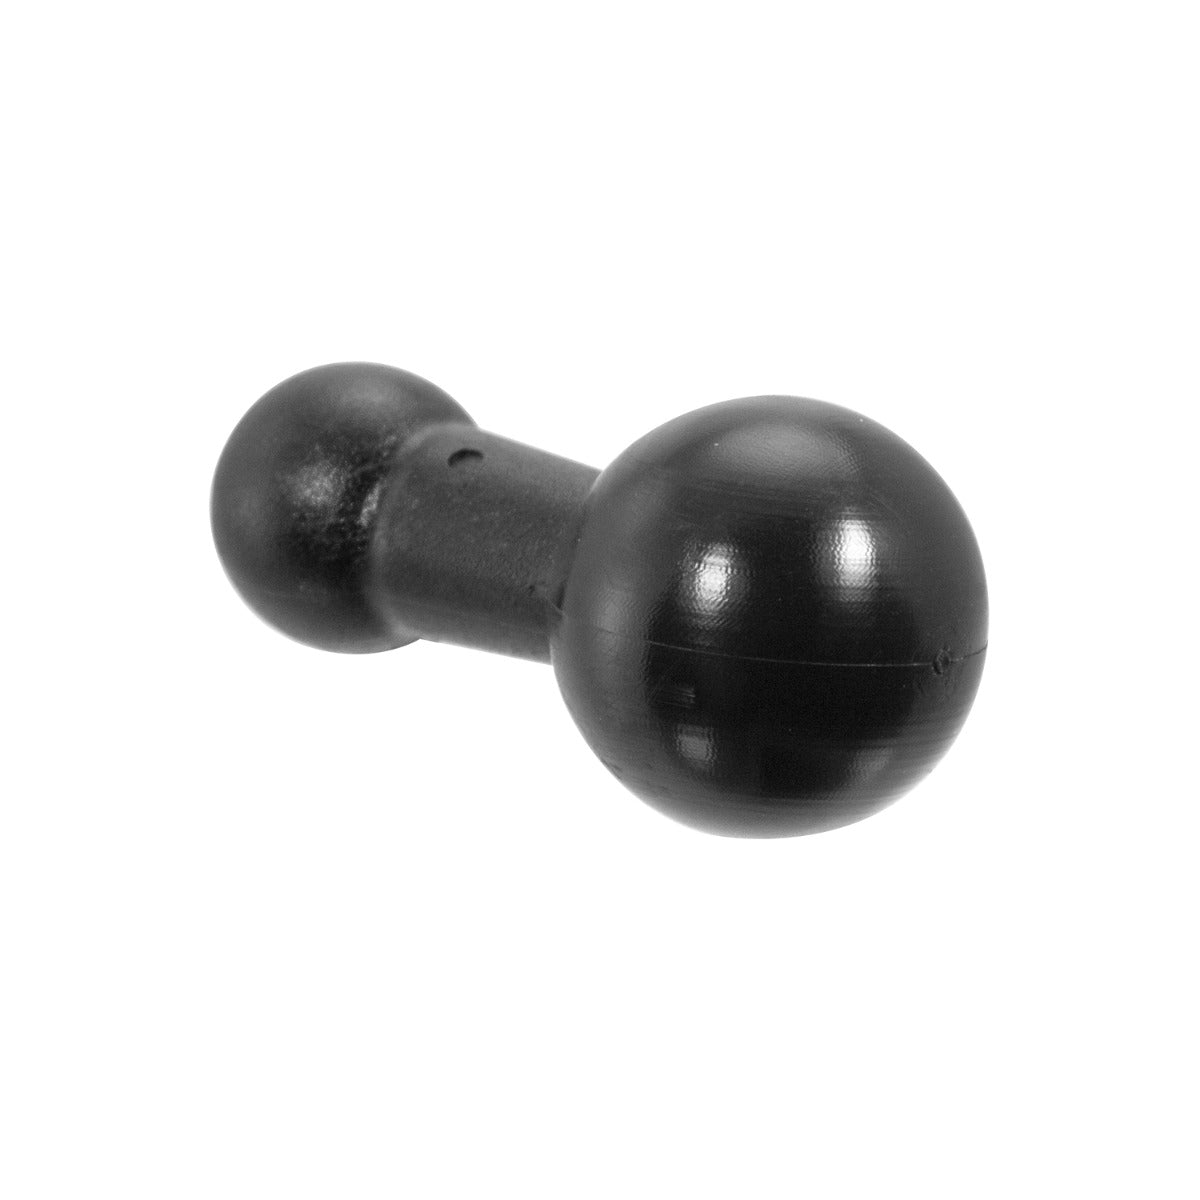 iBOLT™ 25mm / 1 inch to 17mm Composite Ball Adapter